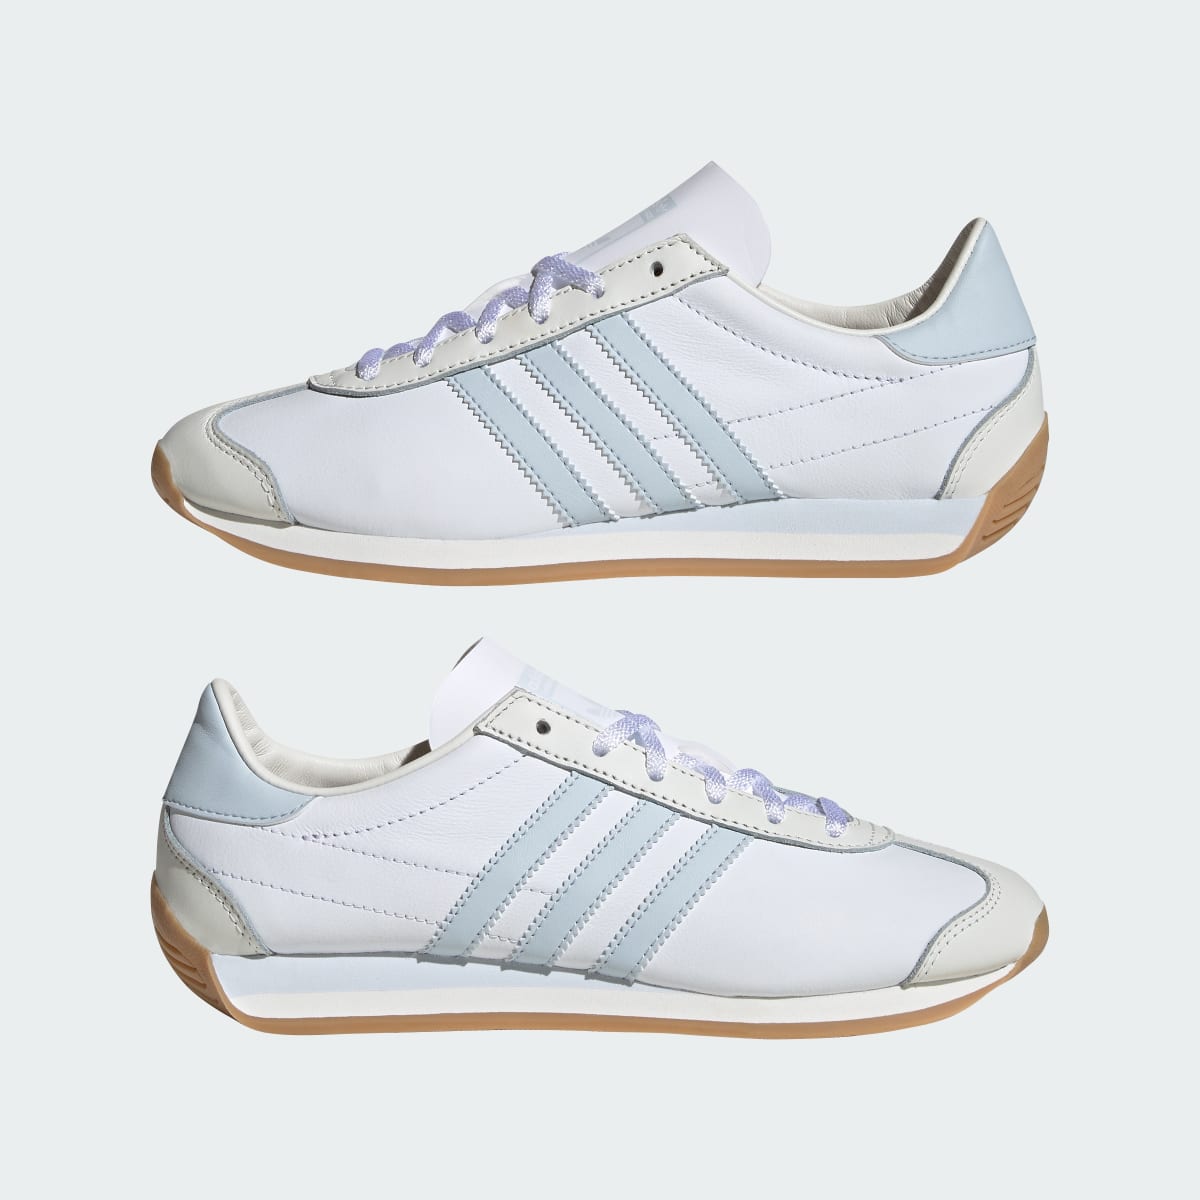 Adidas Country OG Shoes. 8